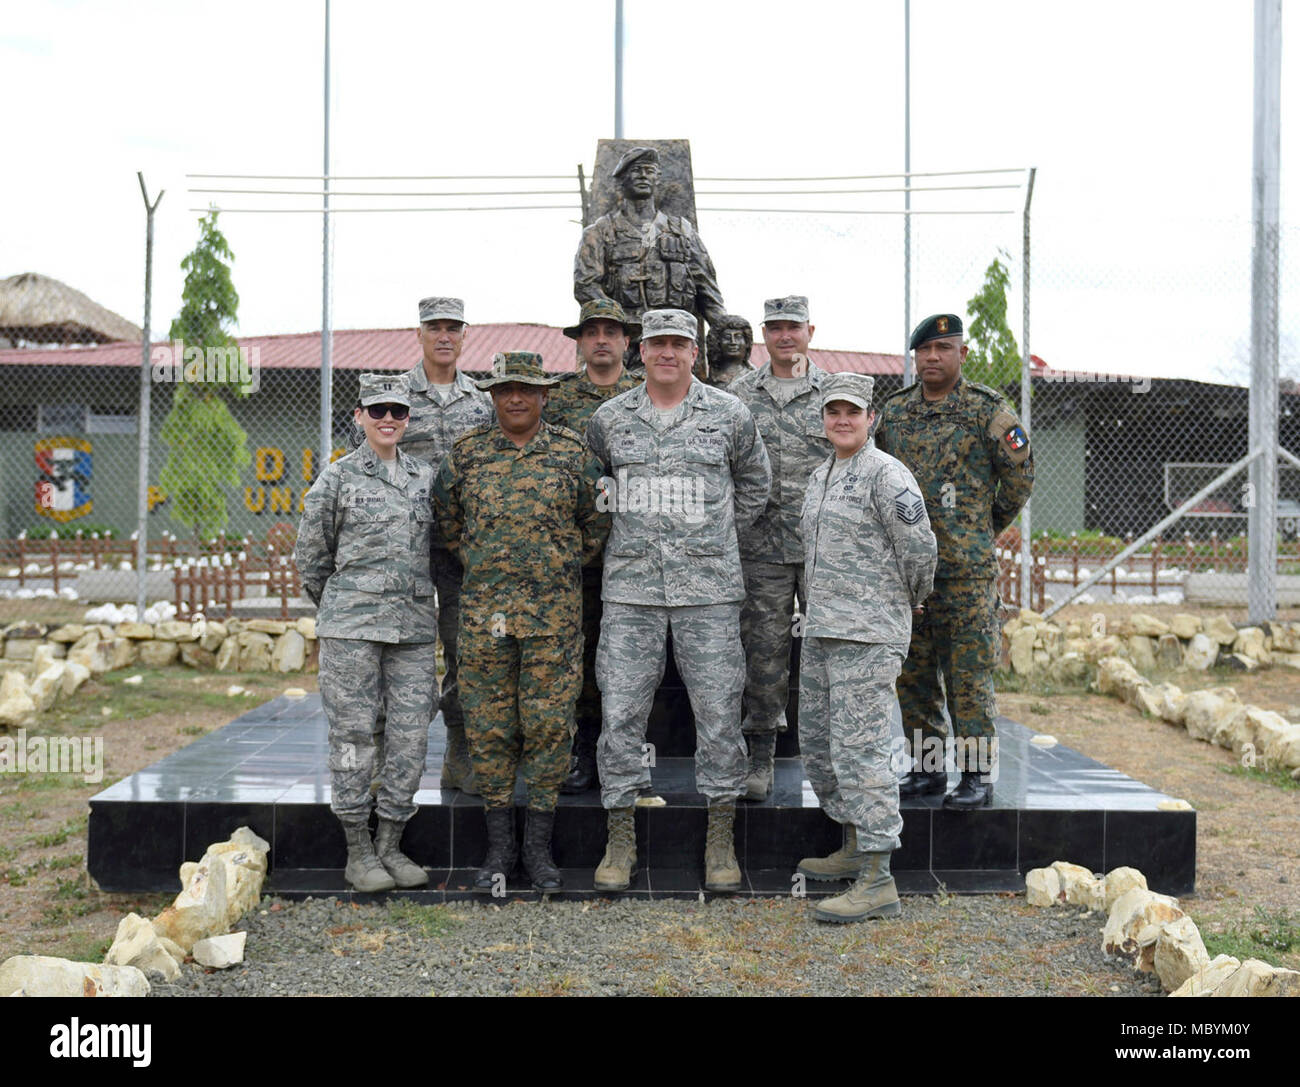 The leadership team of the 346th Air Expeditionary Group and leaders of the Panamanian military and police force known as SENAFRONT, stand for a photo during Exercise New Horizons 2018 April 1, 2018 in Meteti, Panama. Exercise New Horizons is a joint training exercise where all branches of the U.S. military conduct training in civil engineer, medical and support services while benefiting the local community. Stock Photo